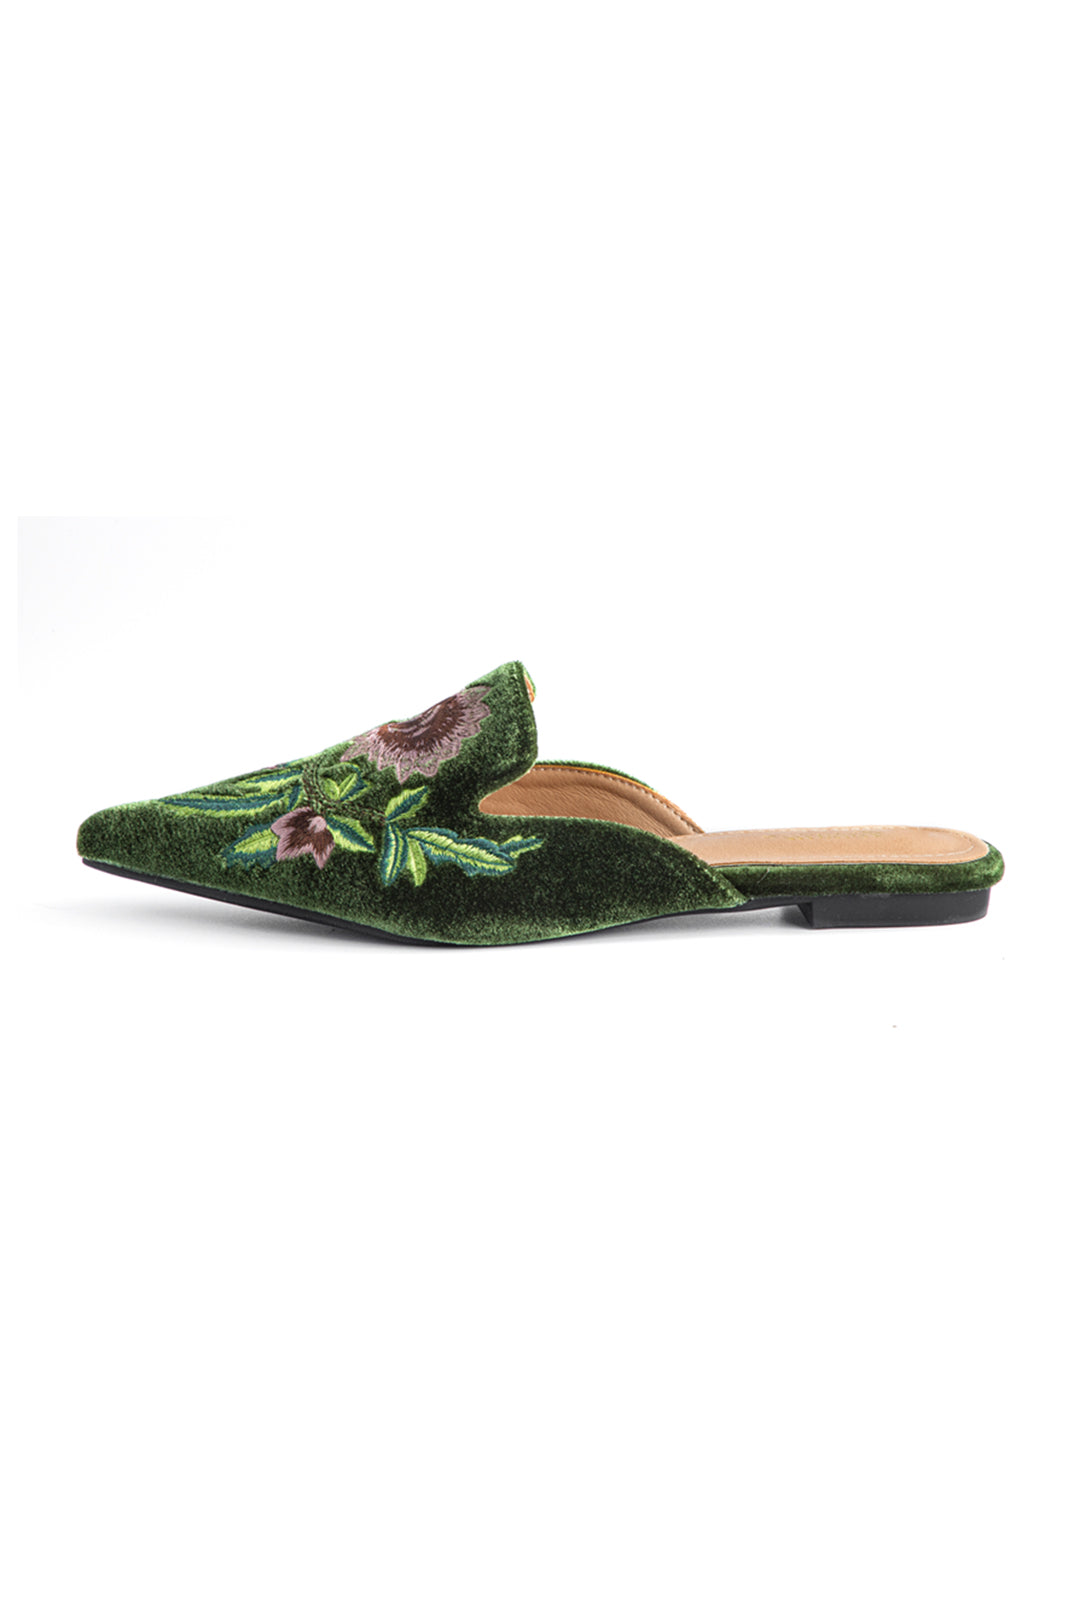 Floral Embroidered Velvet Pointed-Toe Slippers